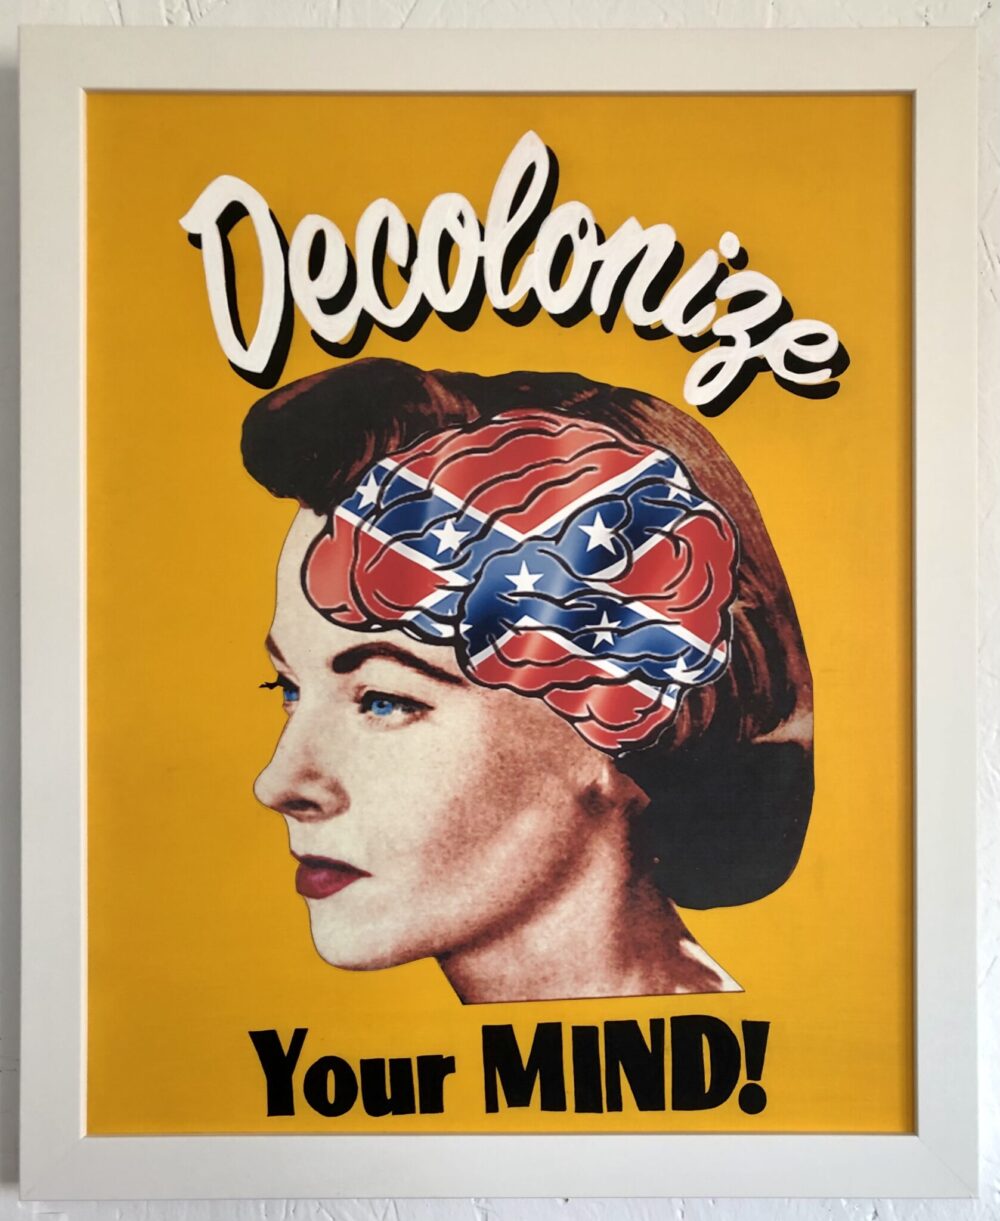 decolonize your mind scaled